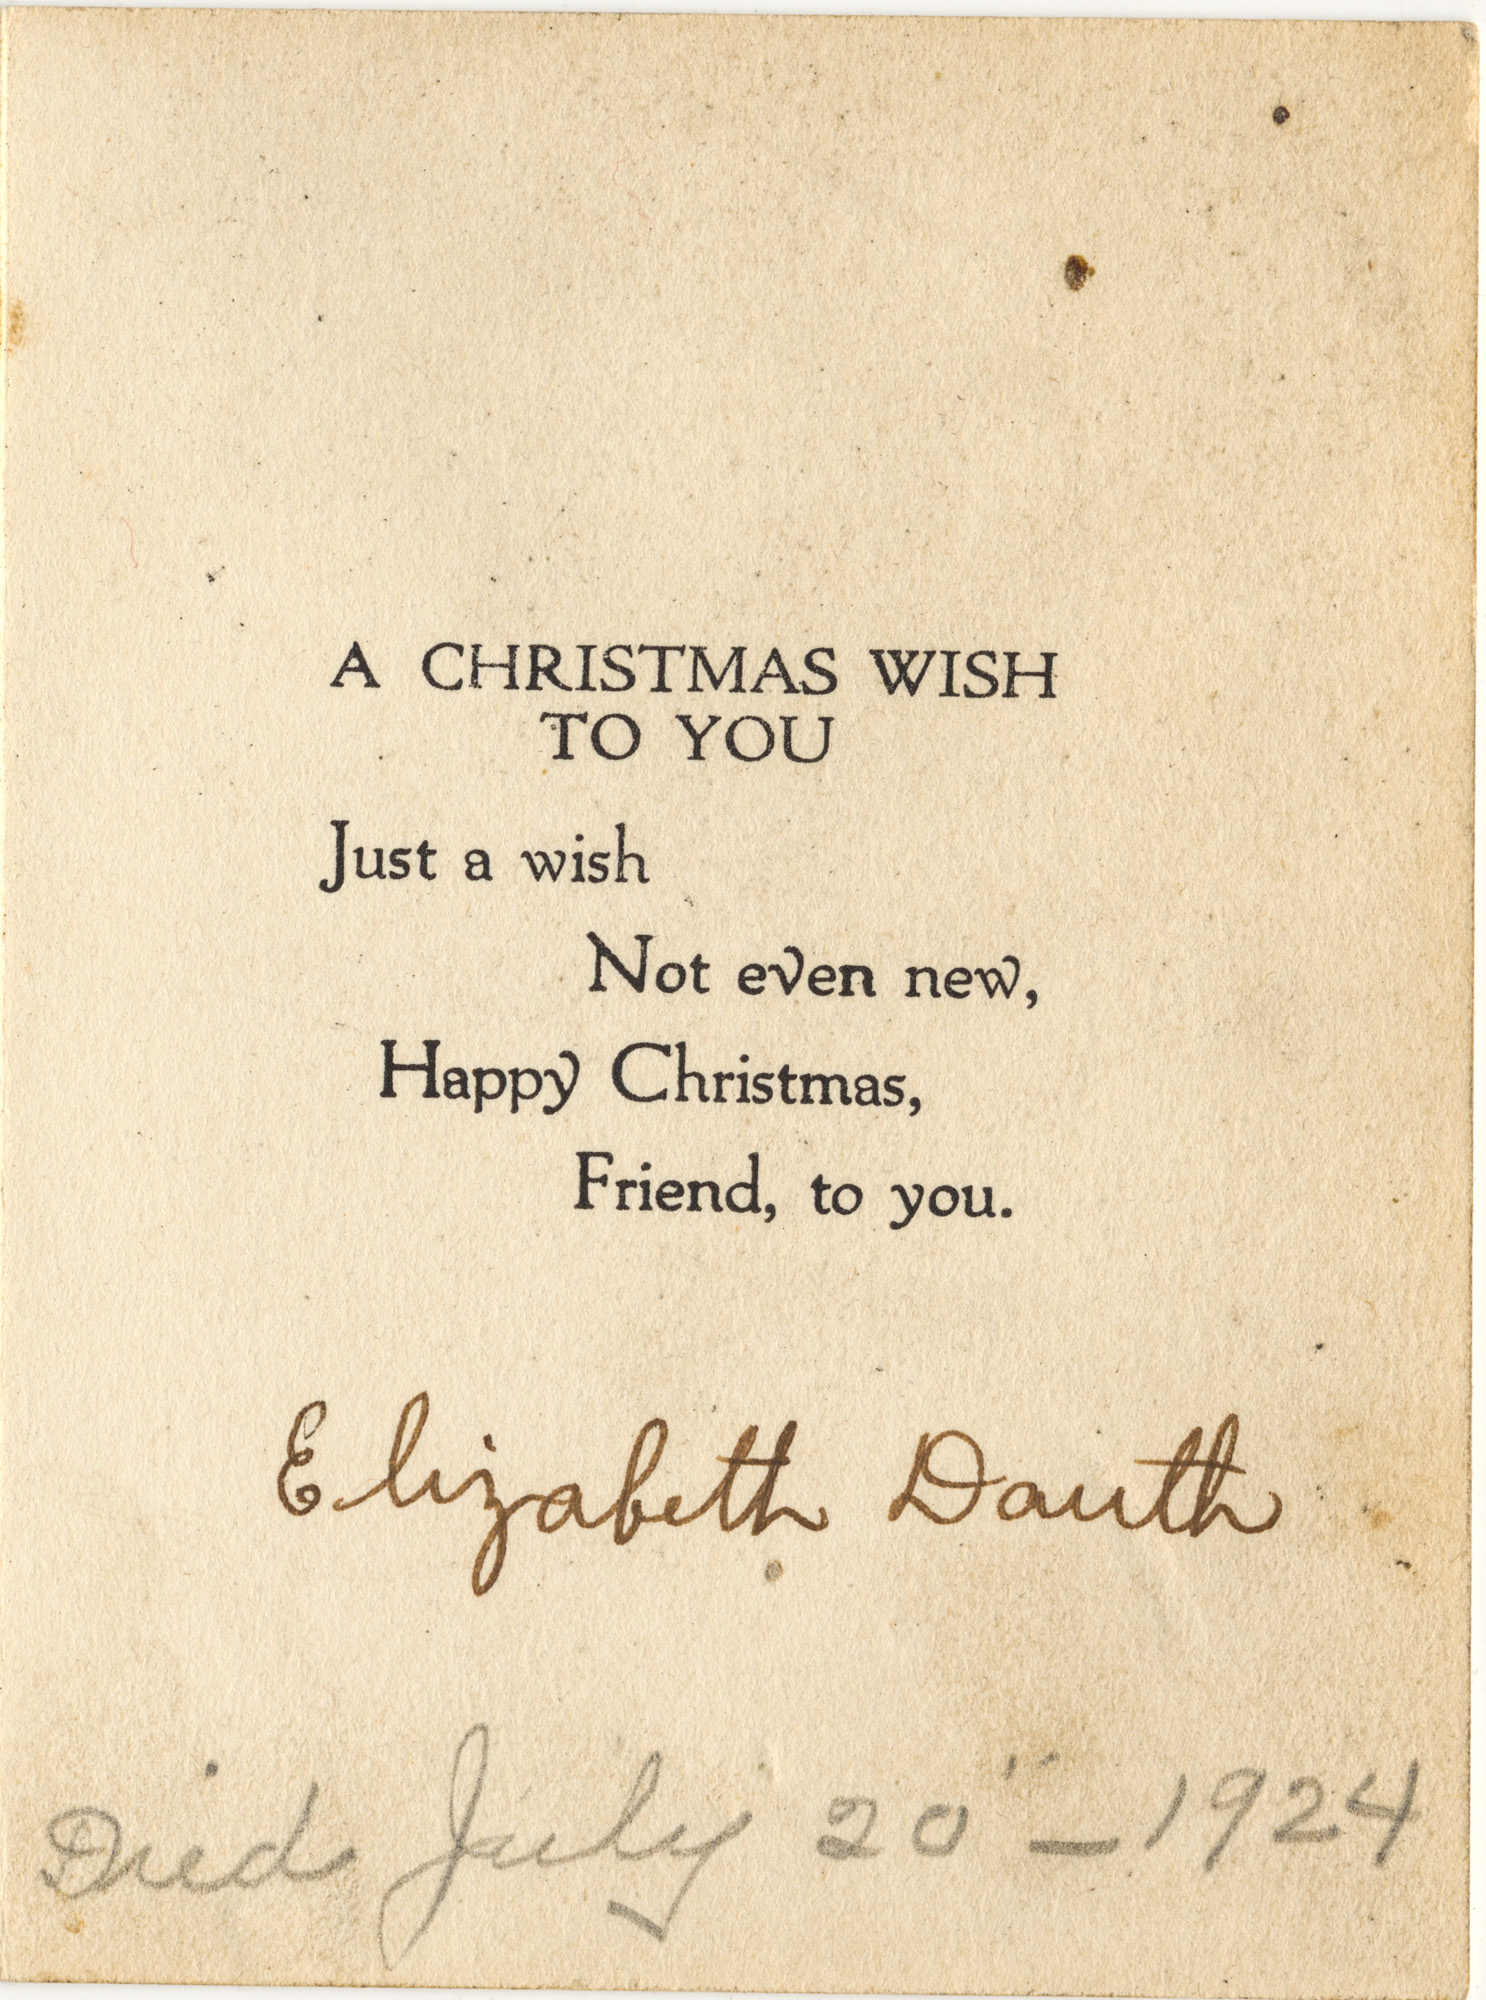 Dauth Family Archive - Circa 1924 - Christmas Card With Note About Elizabeth Dauth Death